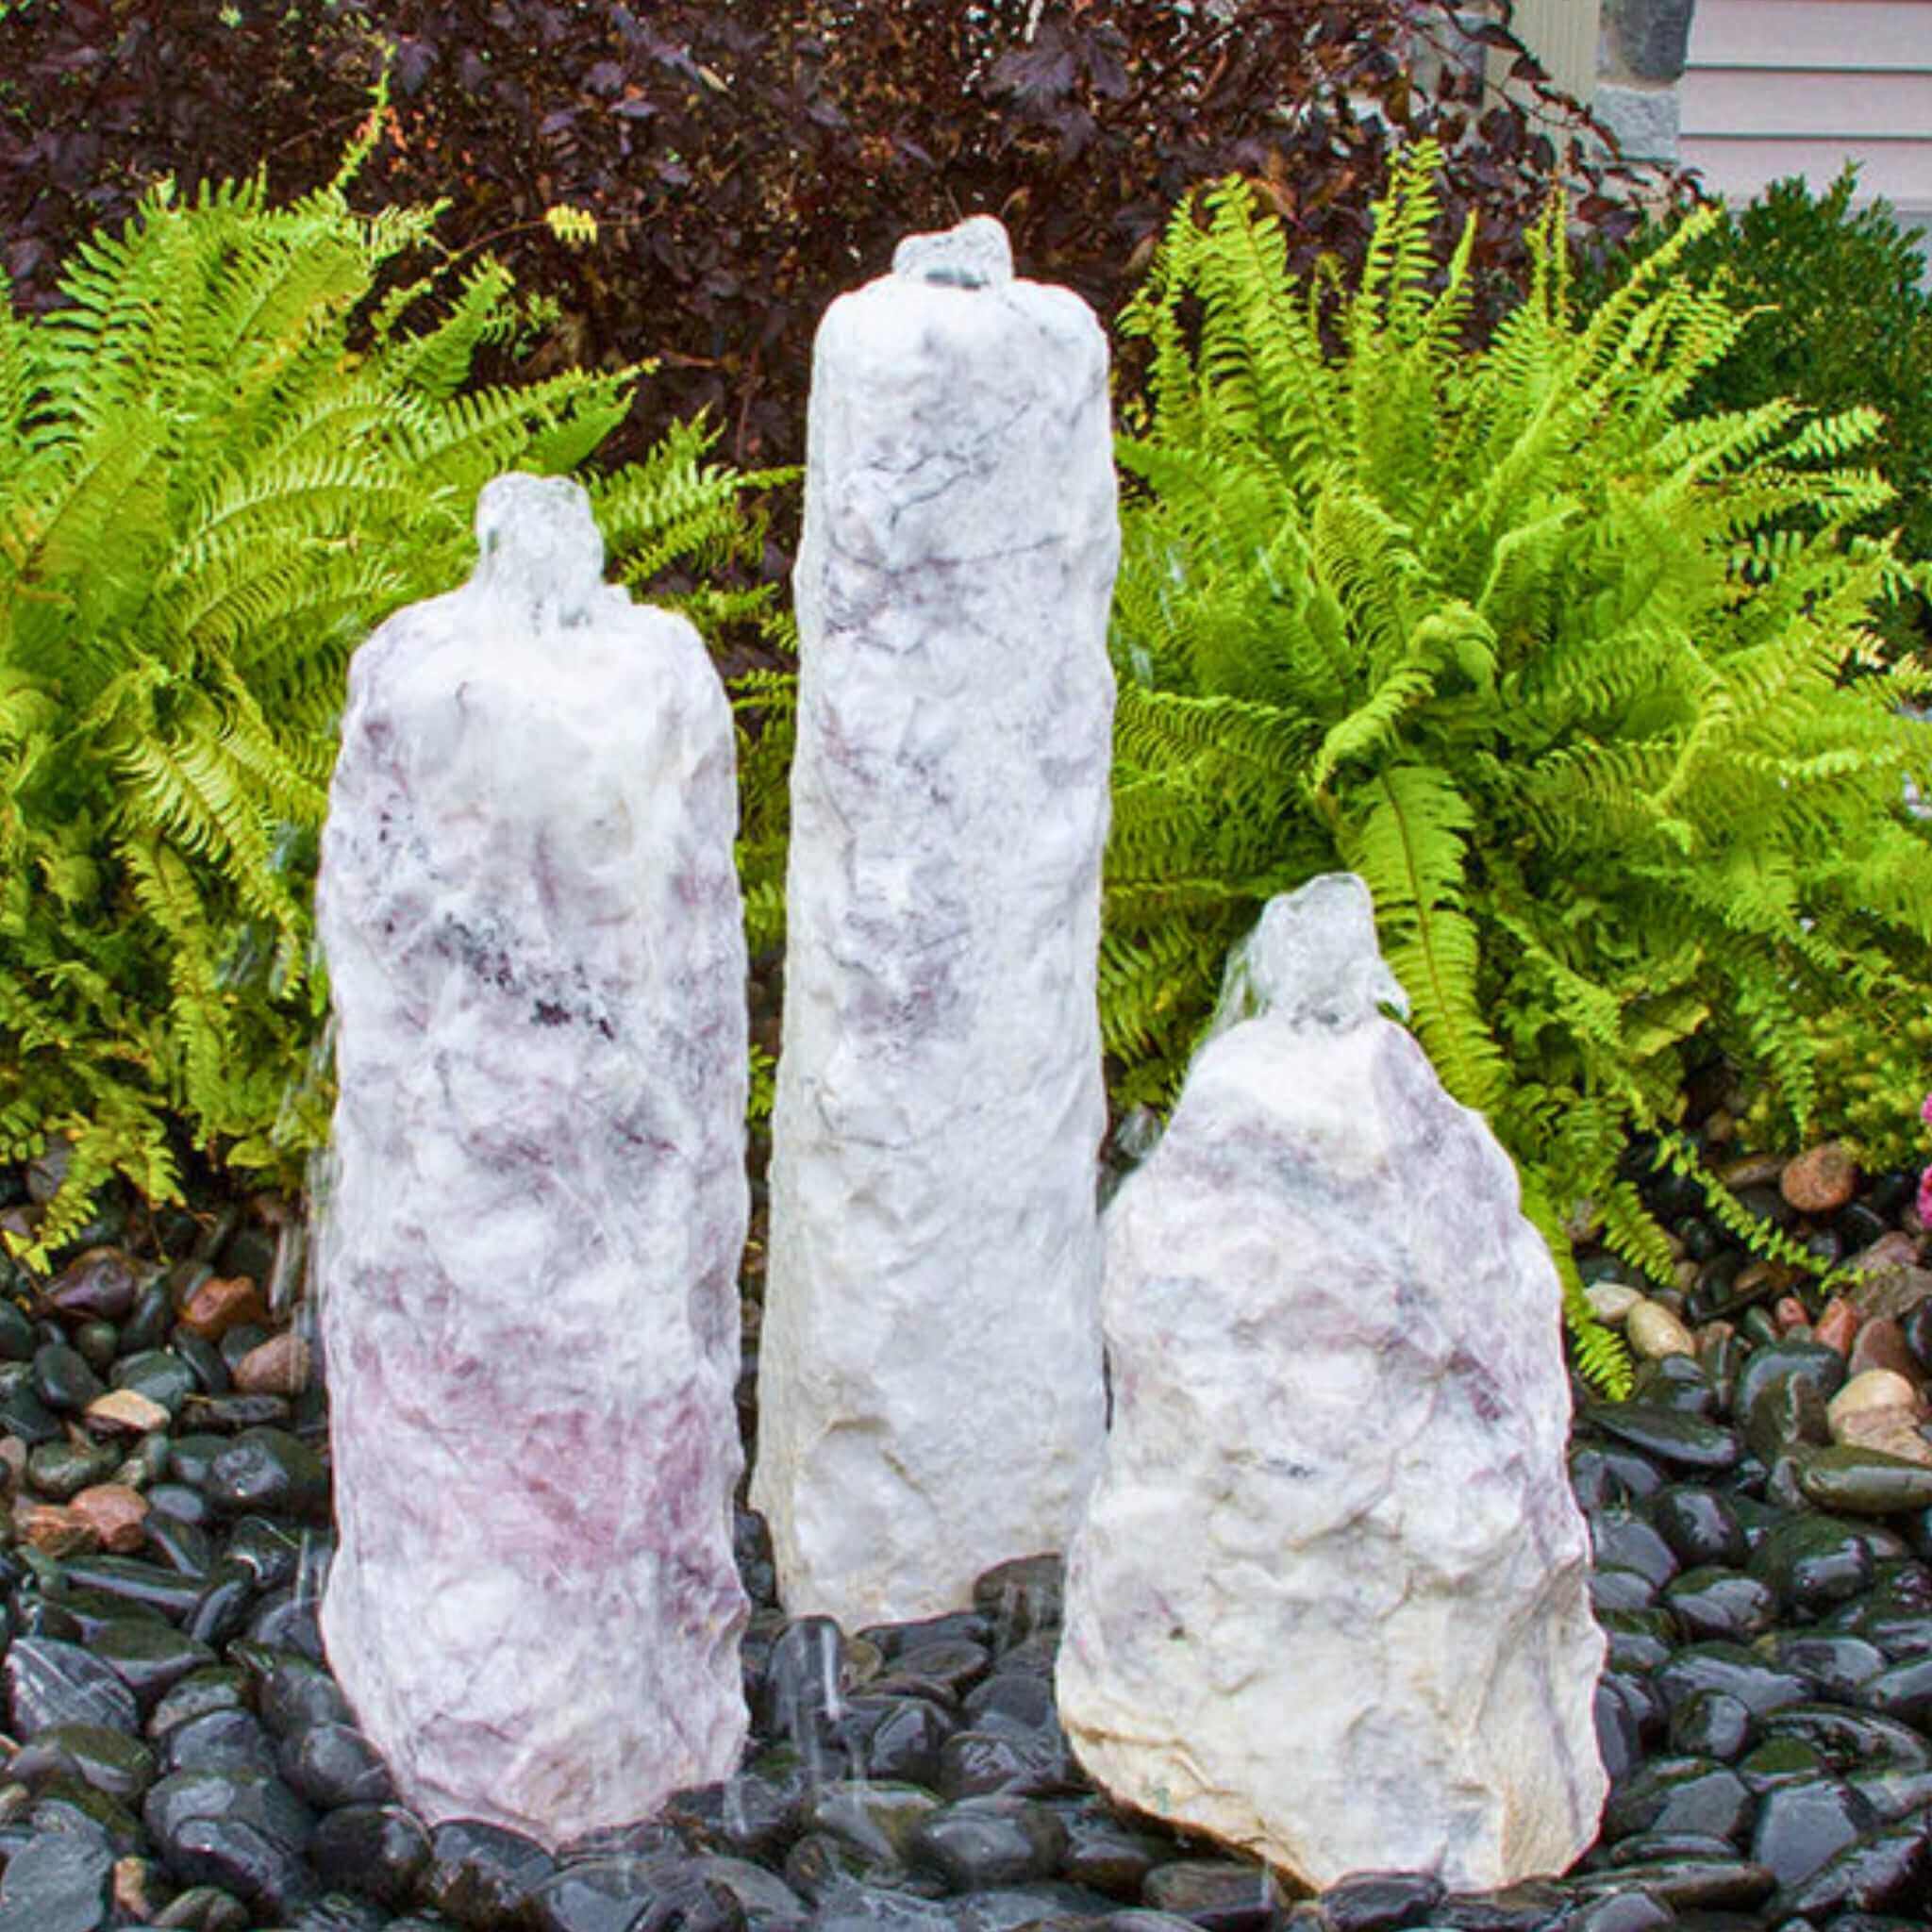 Chiseled "Lilac" 3-Column Stone Fountain - Complete Kit - Blue Thumb